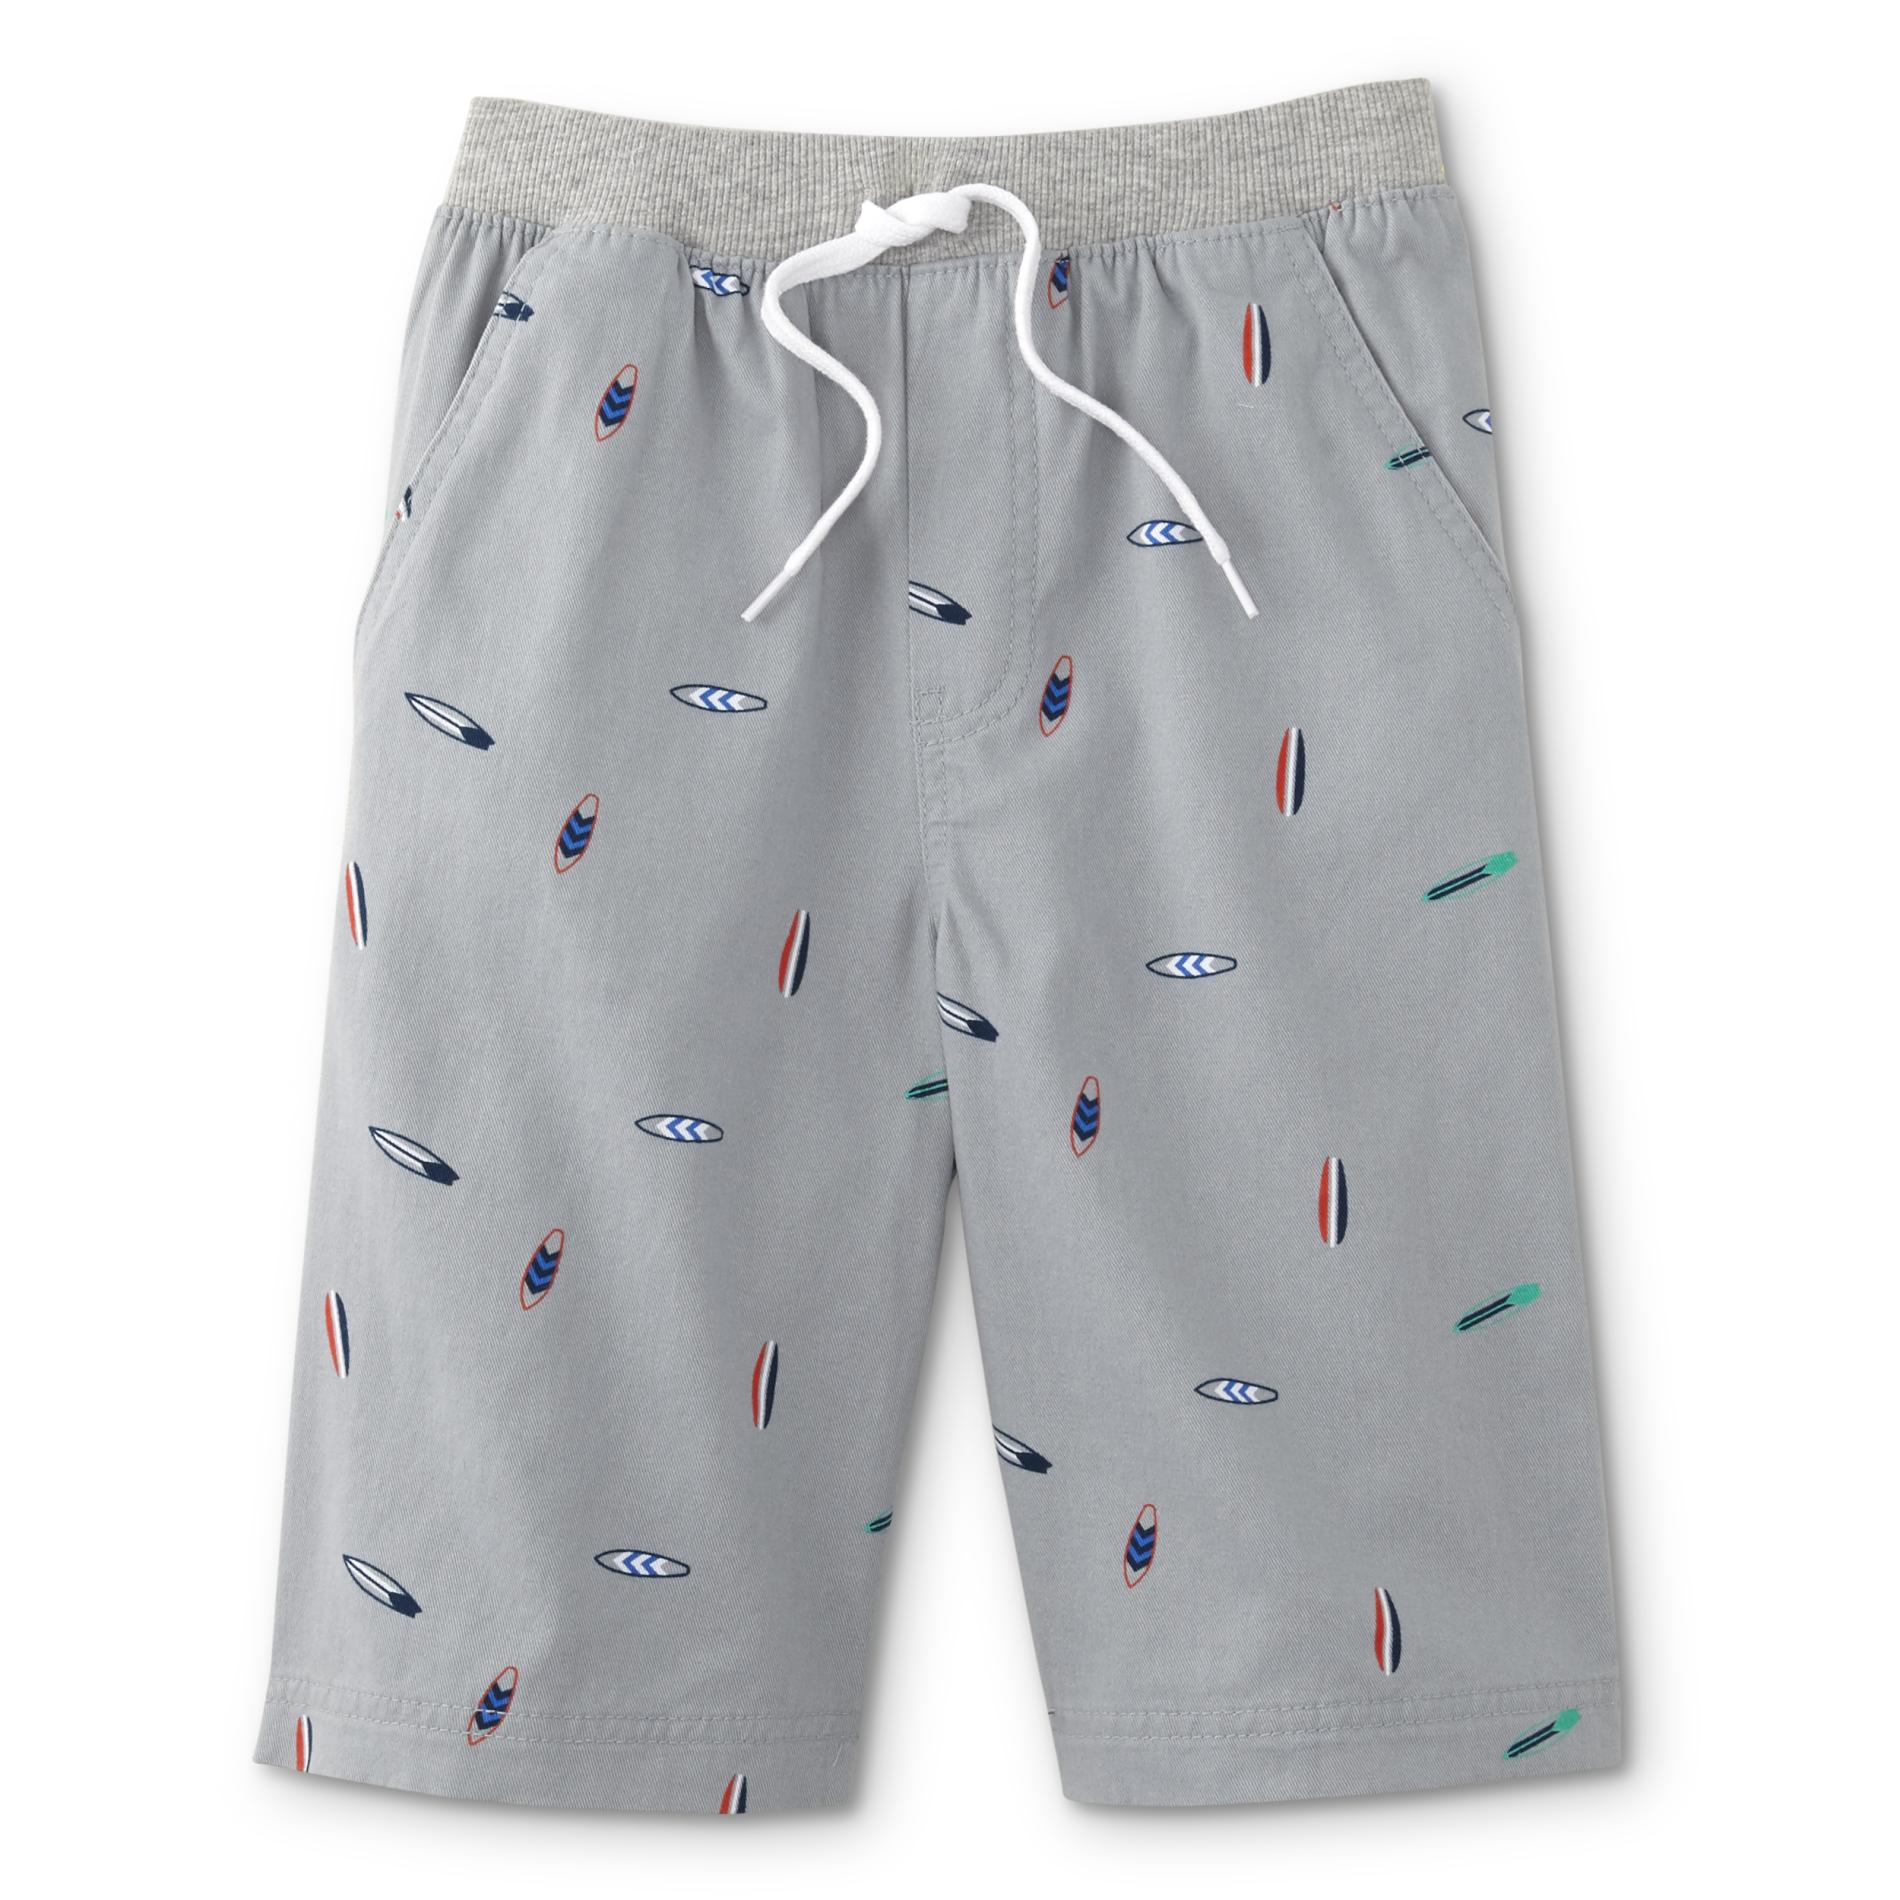 Simply Styled Boys' Shorts - Surfboard